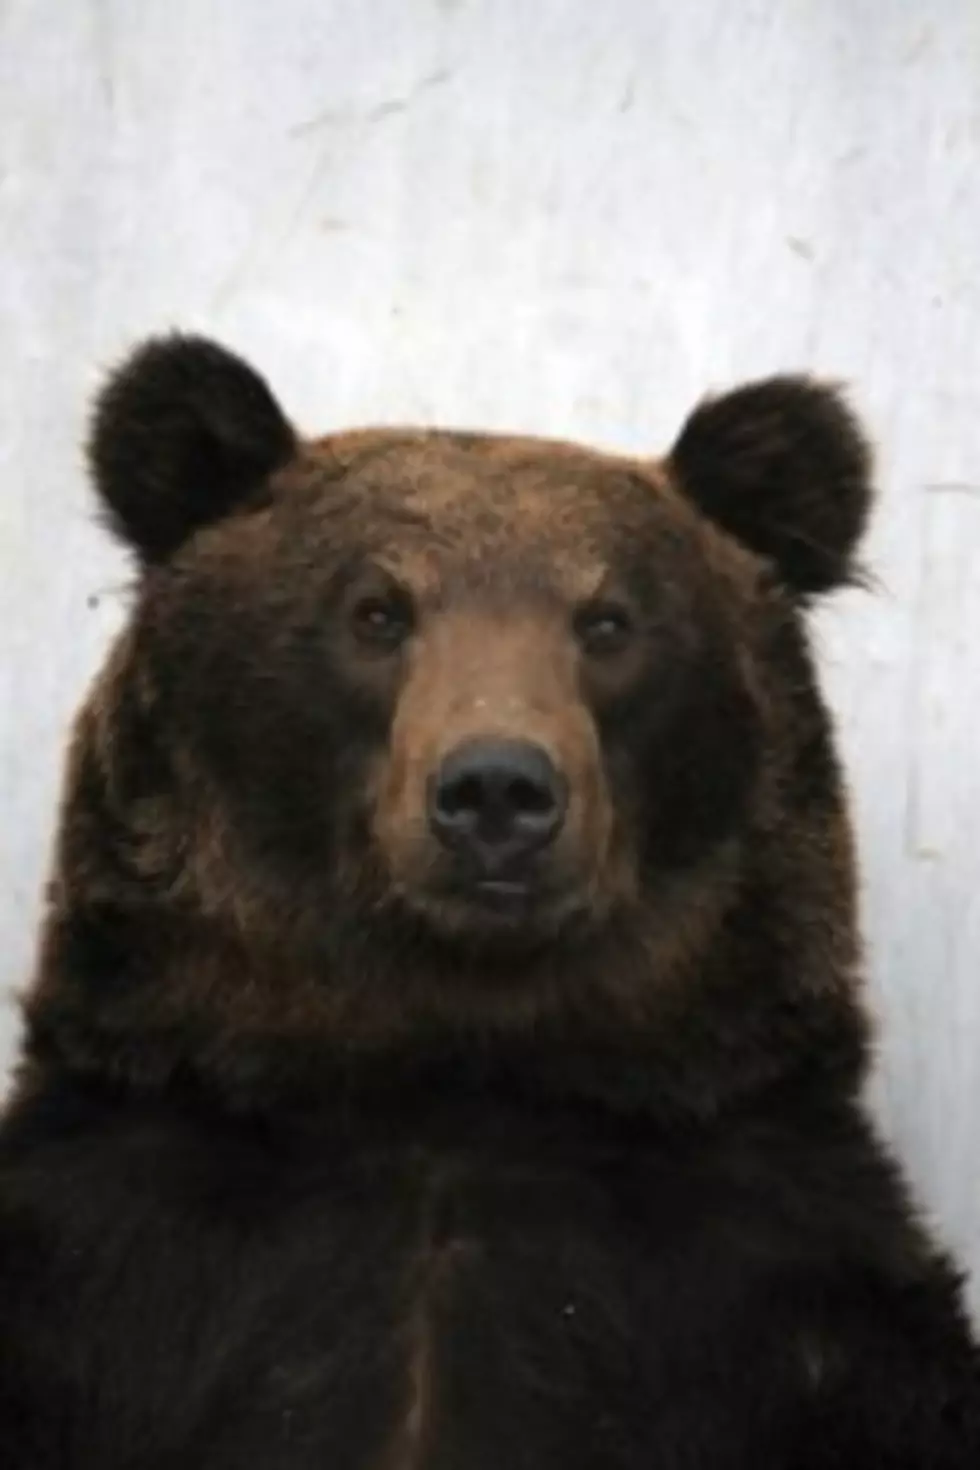 Wyoming Commission Seeks Quick Delisting of Grizzly Bear